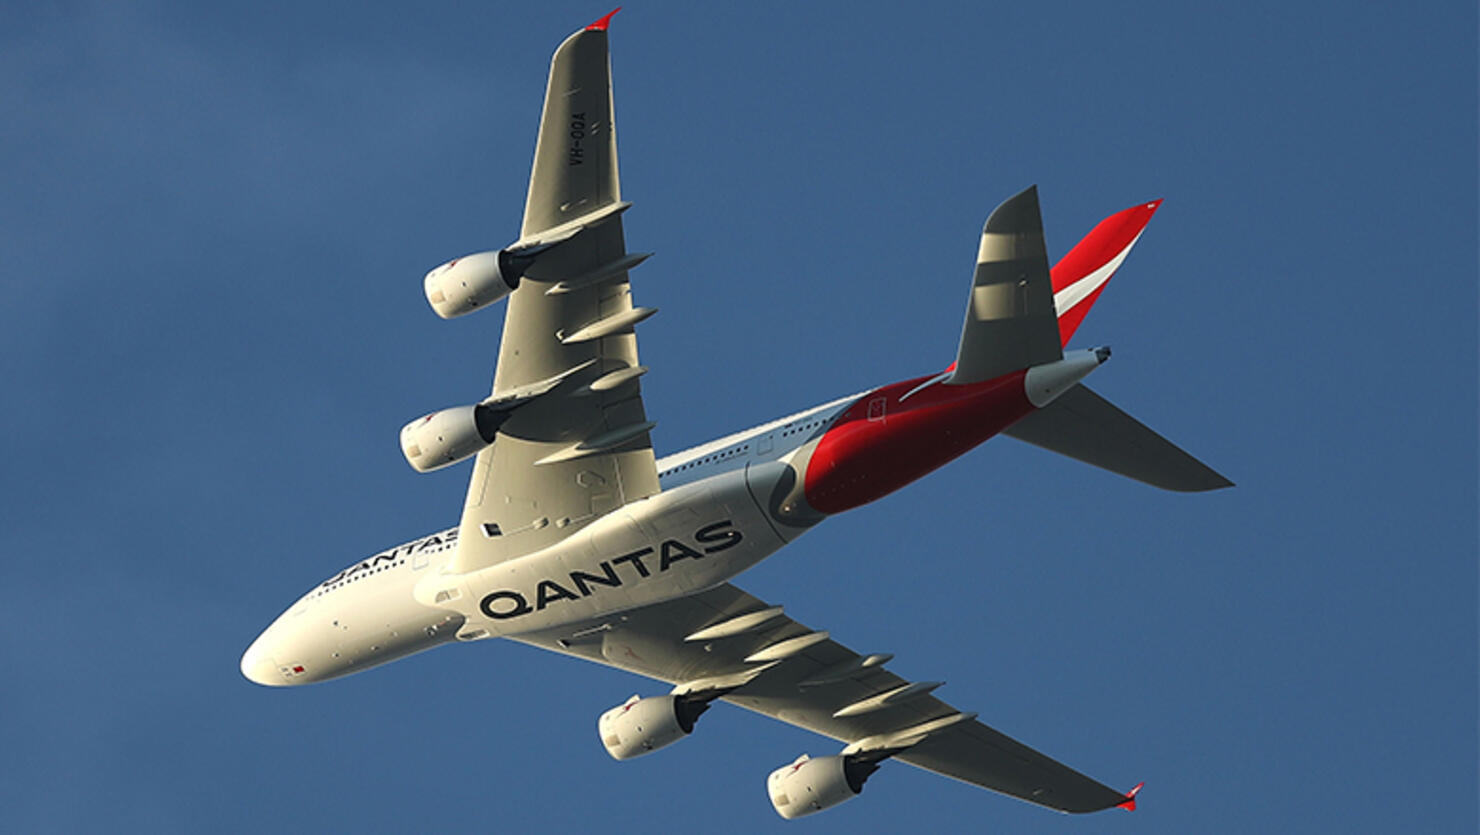  Qantas Airbus A380 in the 'Silver Roo' livery is seen flying over Sydney